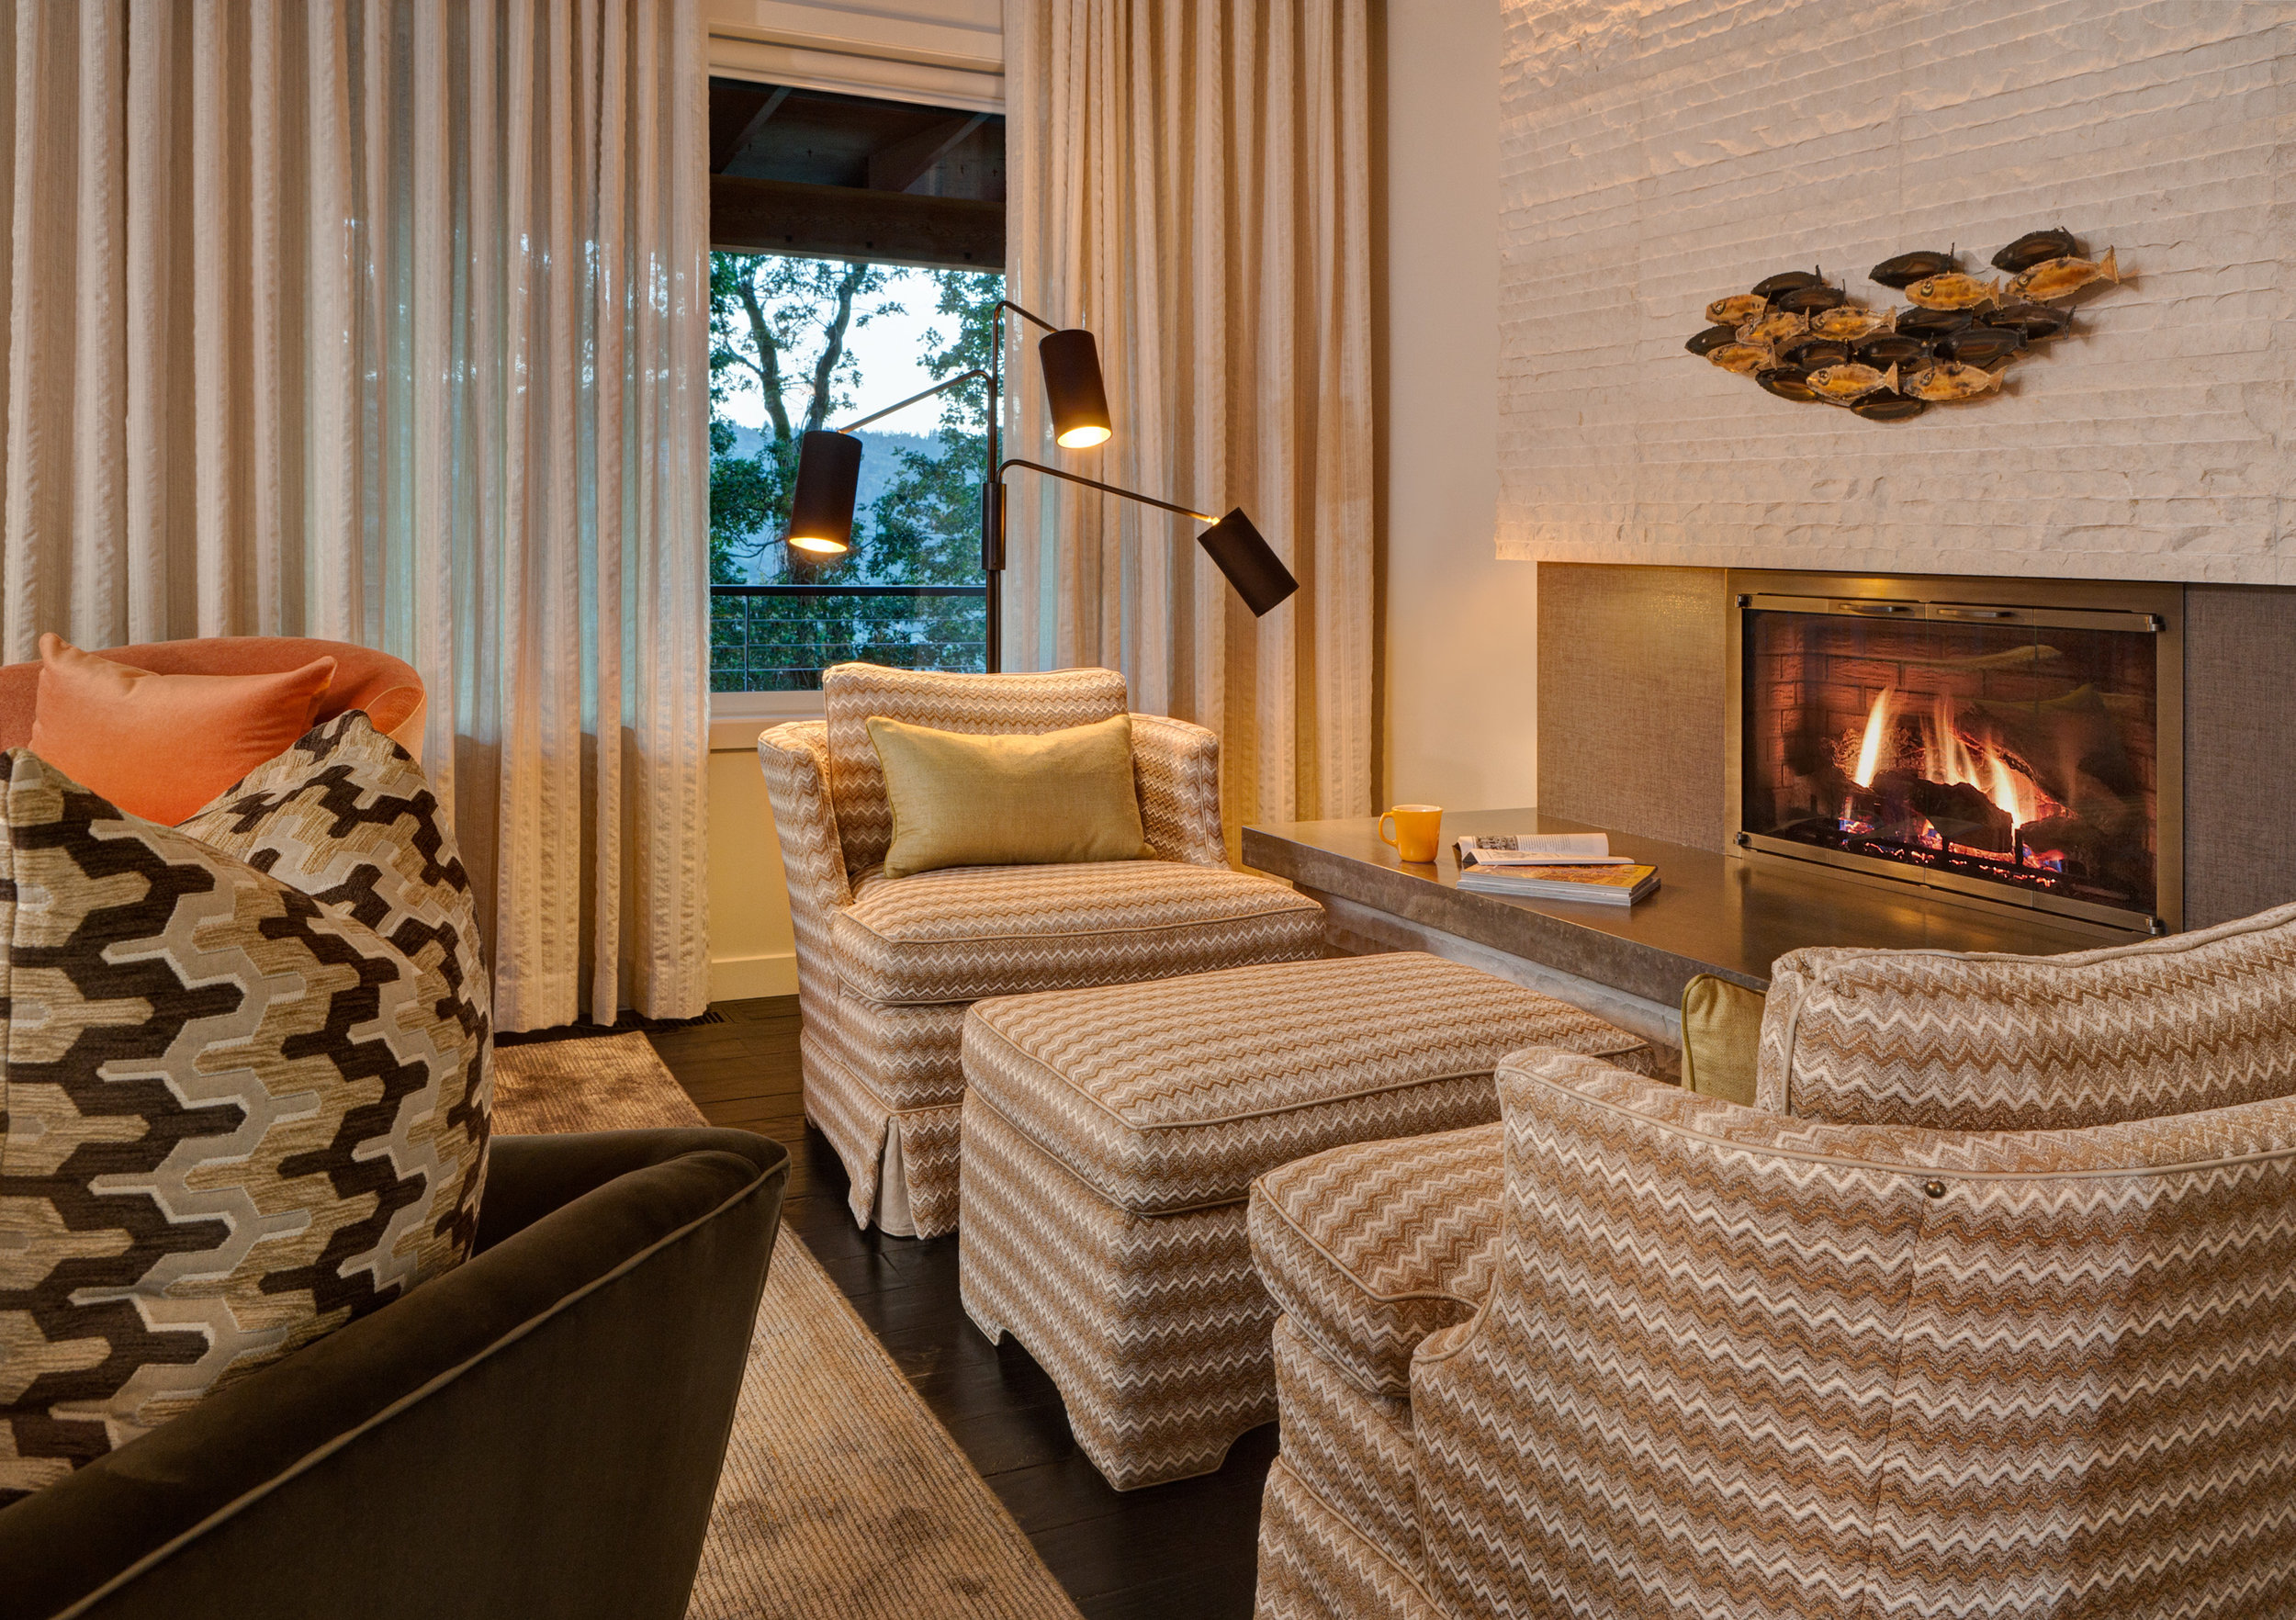 St. Petersburg chiseled limestone wall tile from Ann Sacks surrounds the fireplace.